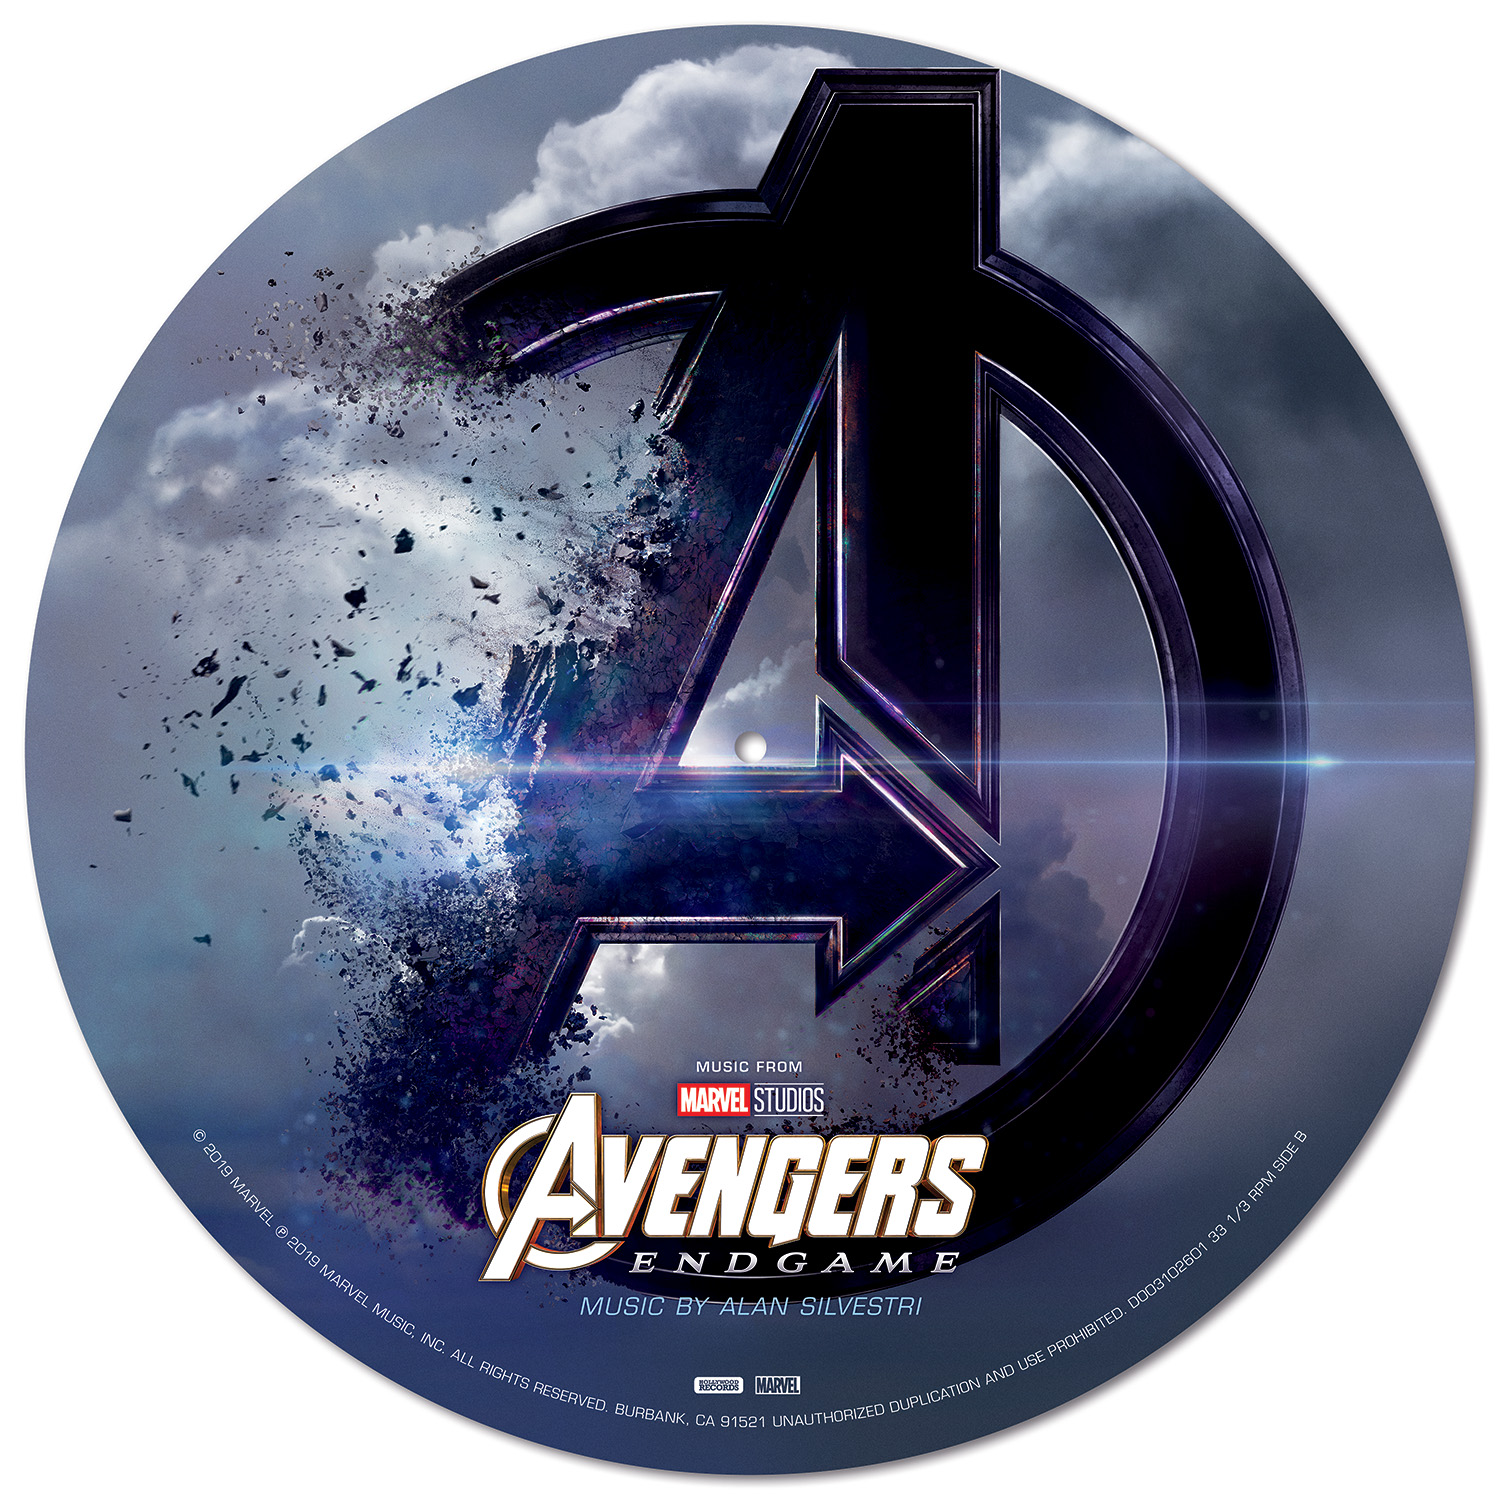 D23 Expo will introduce the first copies of Avengers: Endgame on picture disc vinyl.